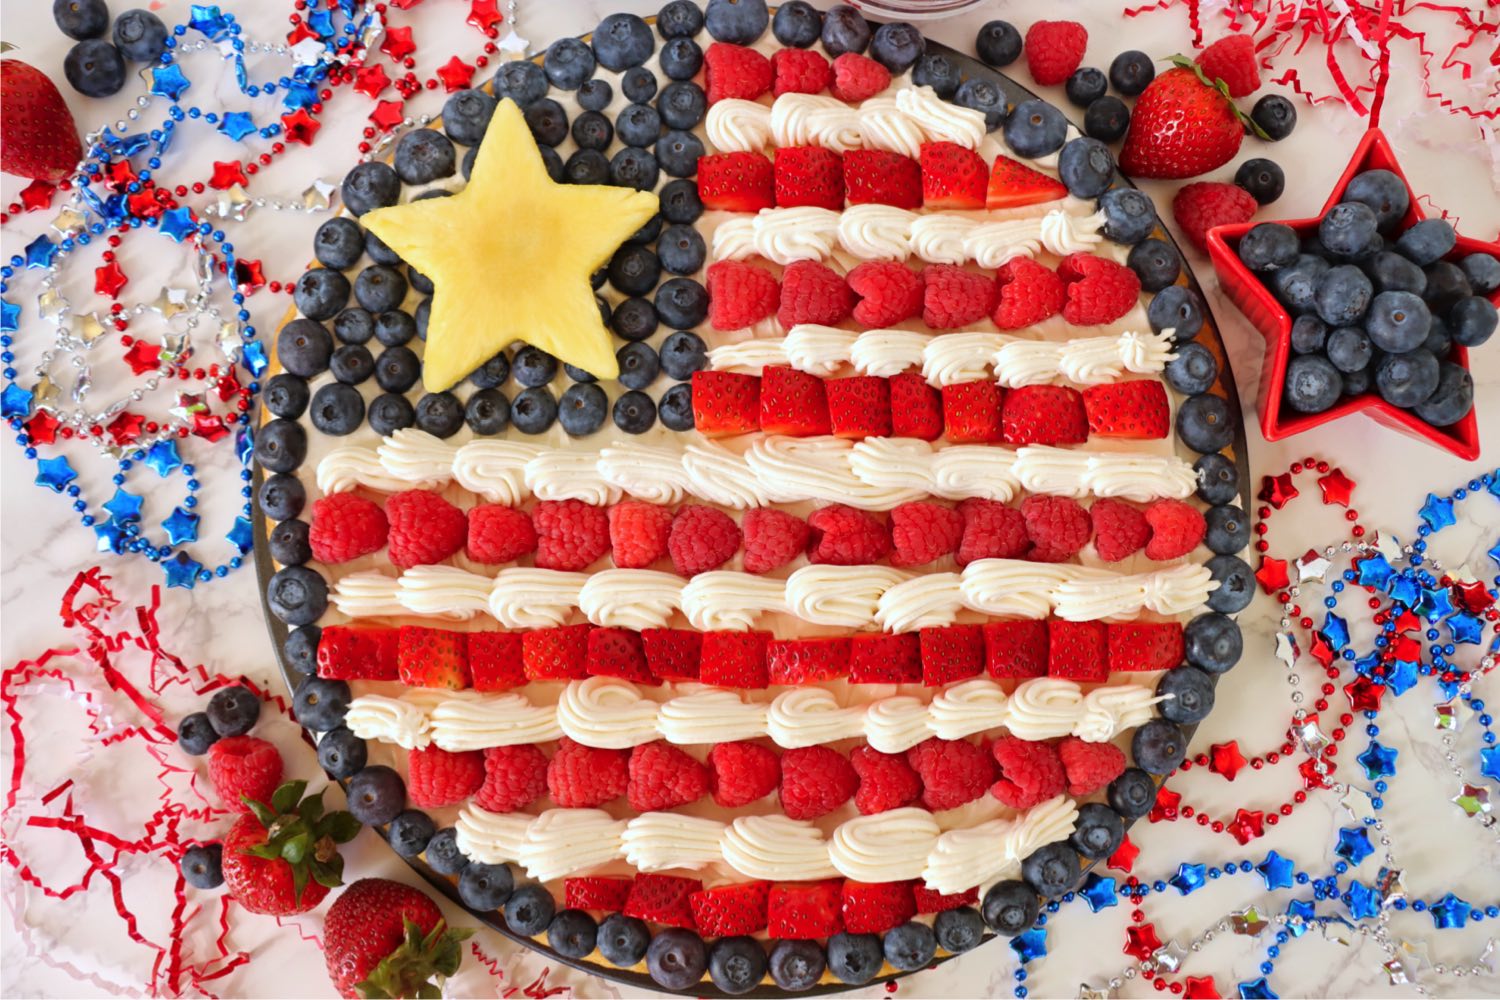 Round fruit pizza made to resemble the American flag